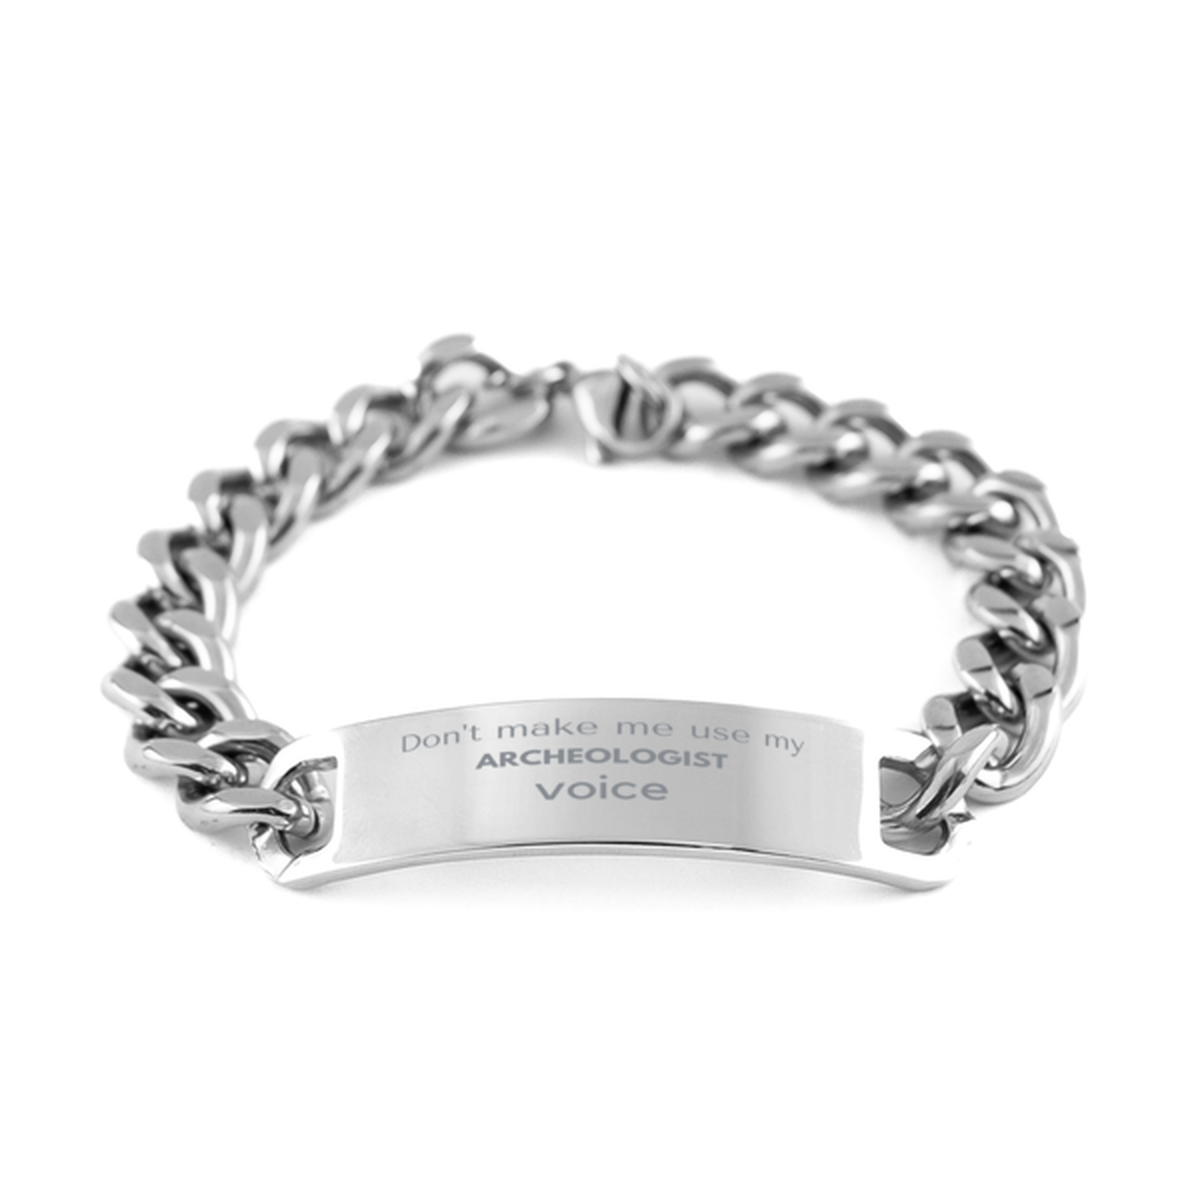 Don't make me use my Archeologist voice, Sarcasm Archeologist Gifts, Christmas Archeologist Cuban Chain Stainless Steel Bracelet Birthday Unique Gifts For Archeologist Coworkers, Men, Women, Colleague, Friends